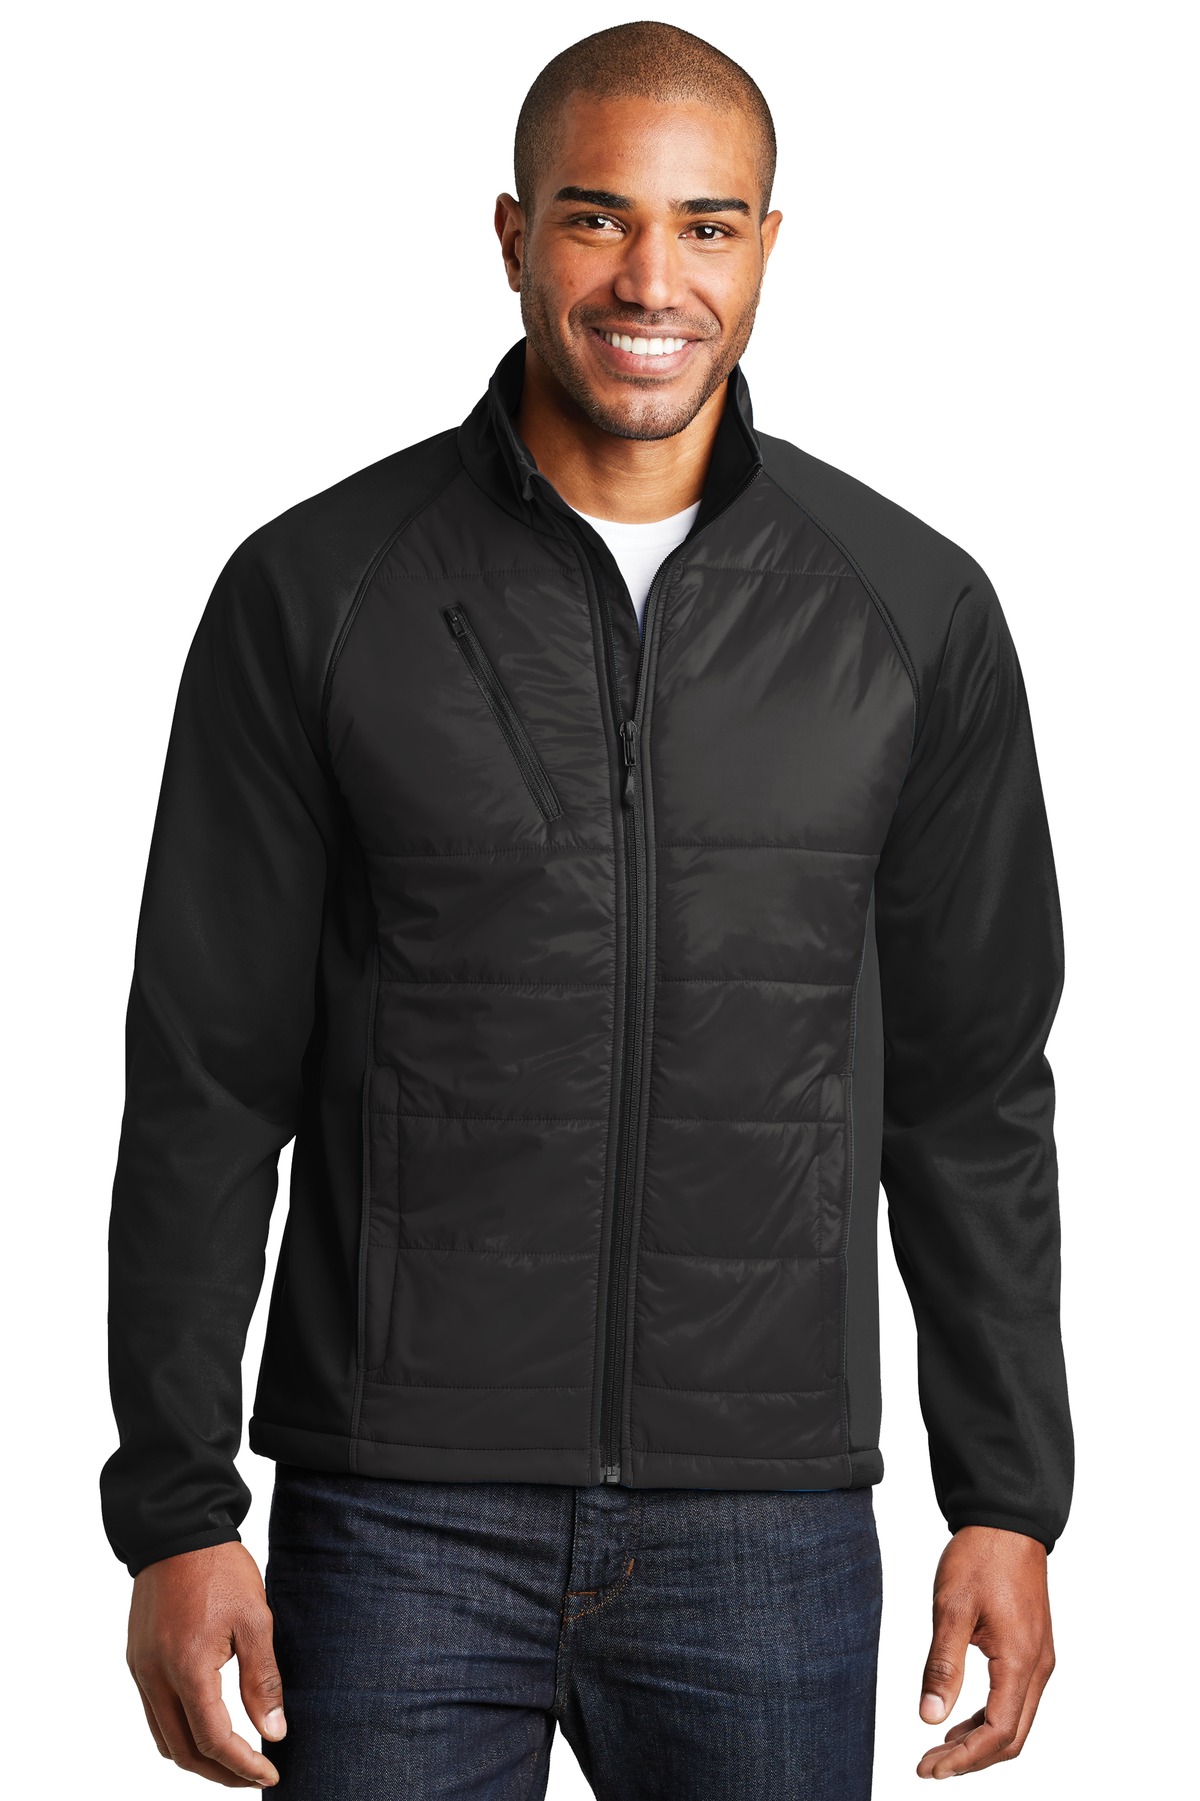 Port Authority Outerwear for Corporate & Hospitality ® Hybrid Soft Shell Jacket.-Port Authority